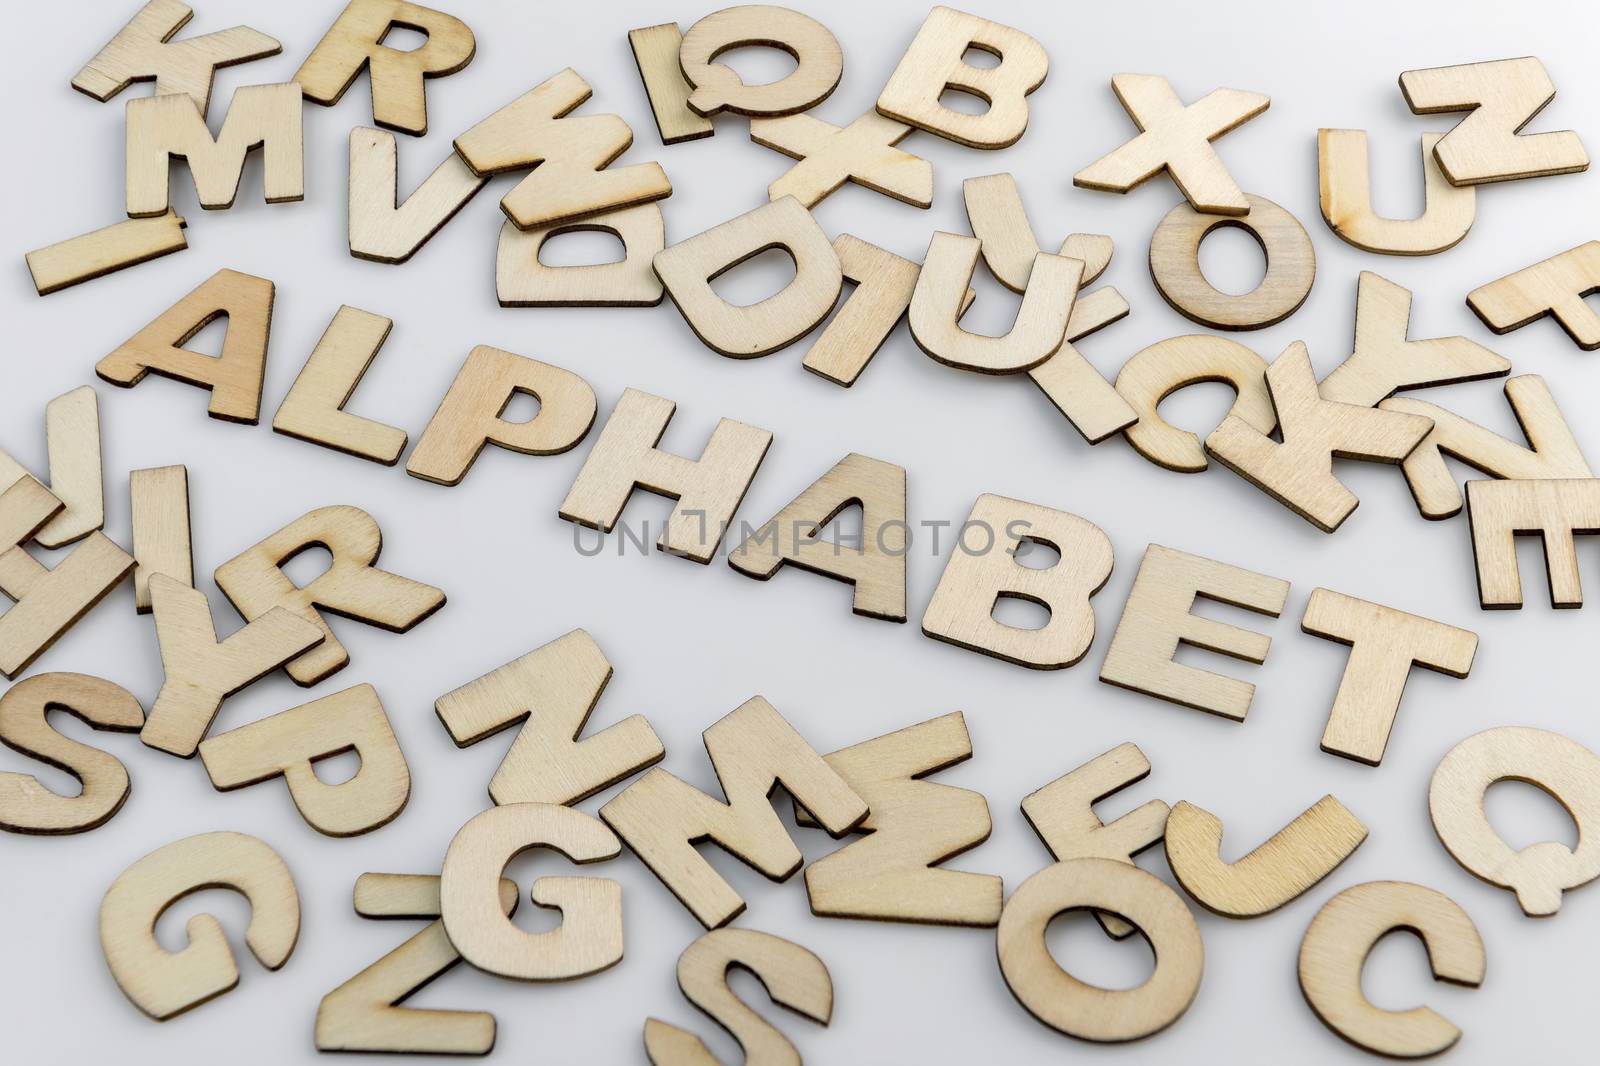 The word alphabet in wooden letters
 by Tofotografie